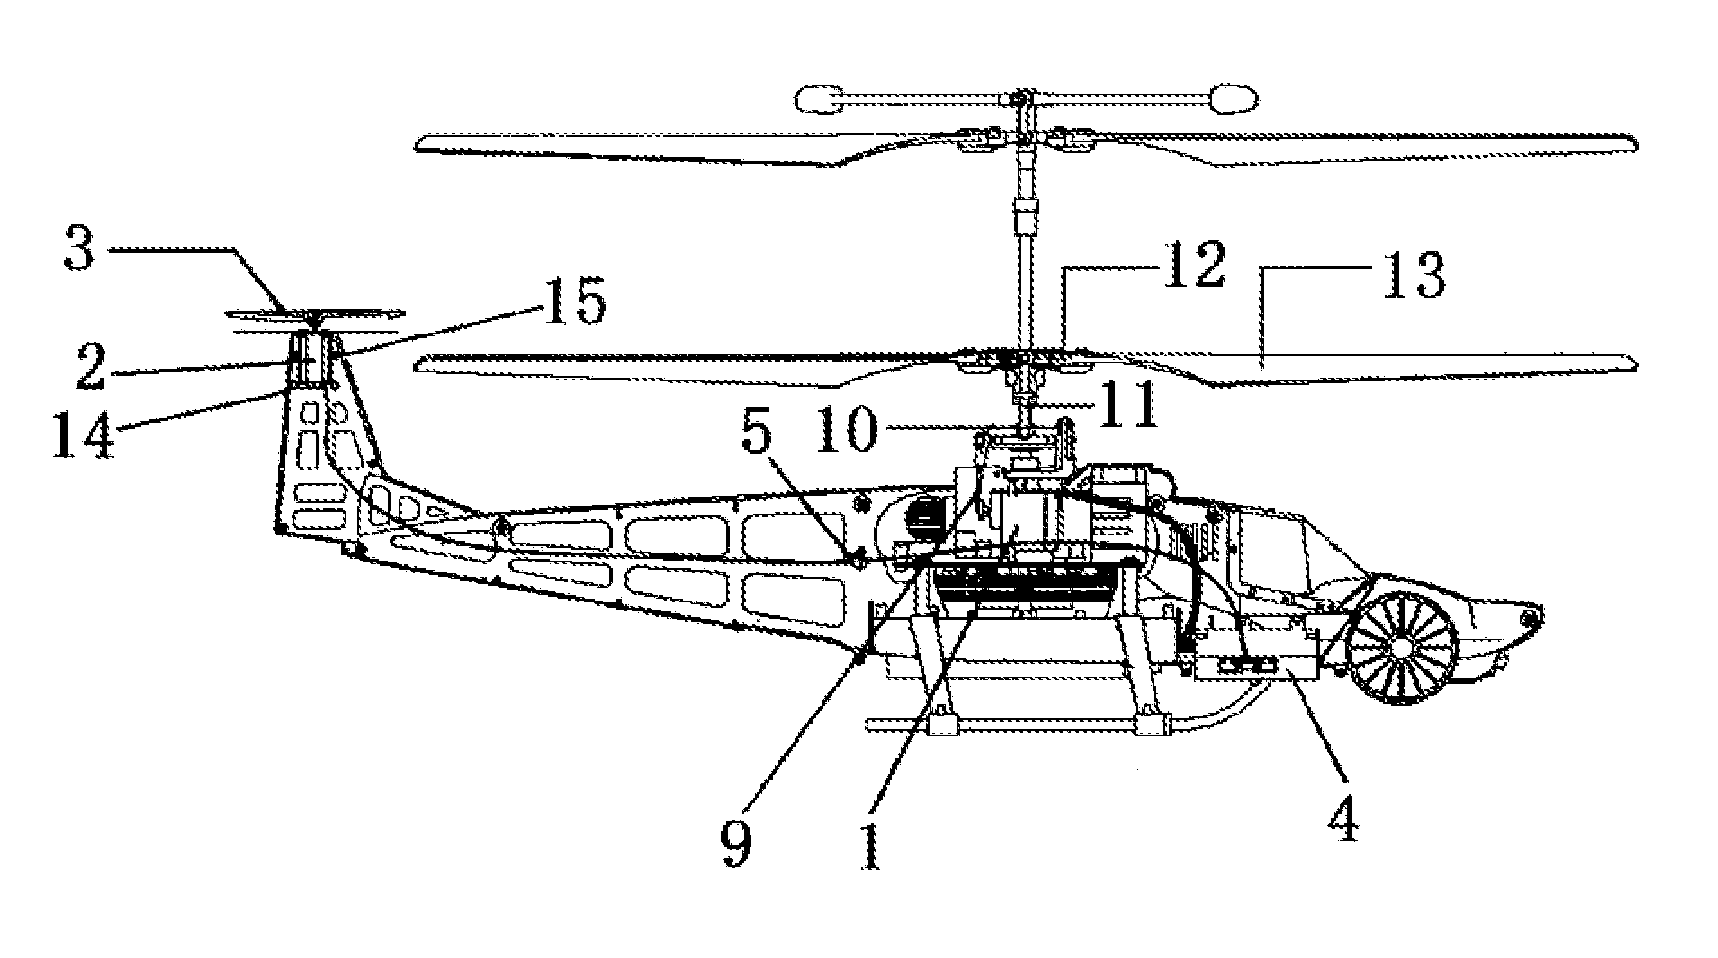 Linkage device for remote control model helicopter with coaxial and counter rotating double-propeller